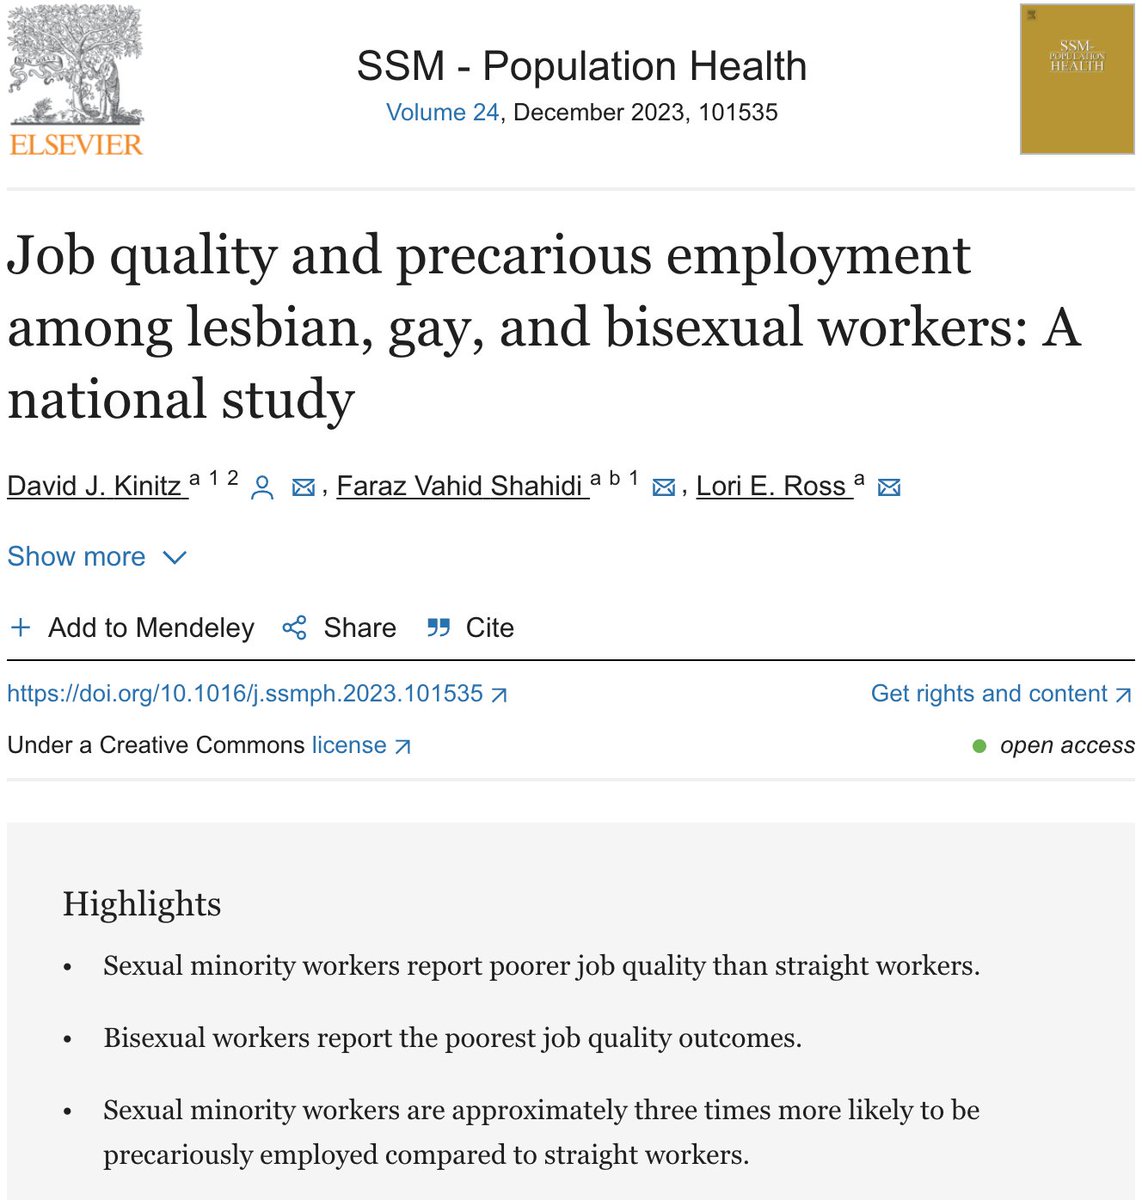 Lesbian, gay & bisexual workers are 3x more likely to be precariously employed. Overqualified, low career prospects & incomes, discrimination & harassment, part-time & irregular/contracts are common; bi workers face the poorest outcomes. #SDOH #LGBTQ Check out our OA article!